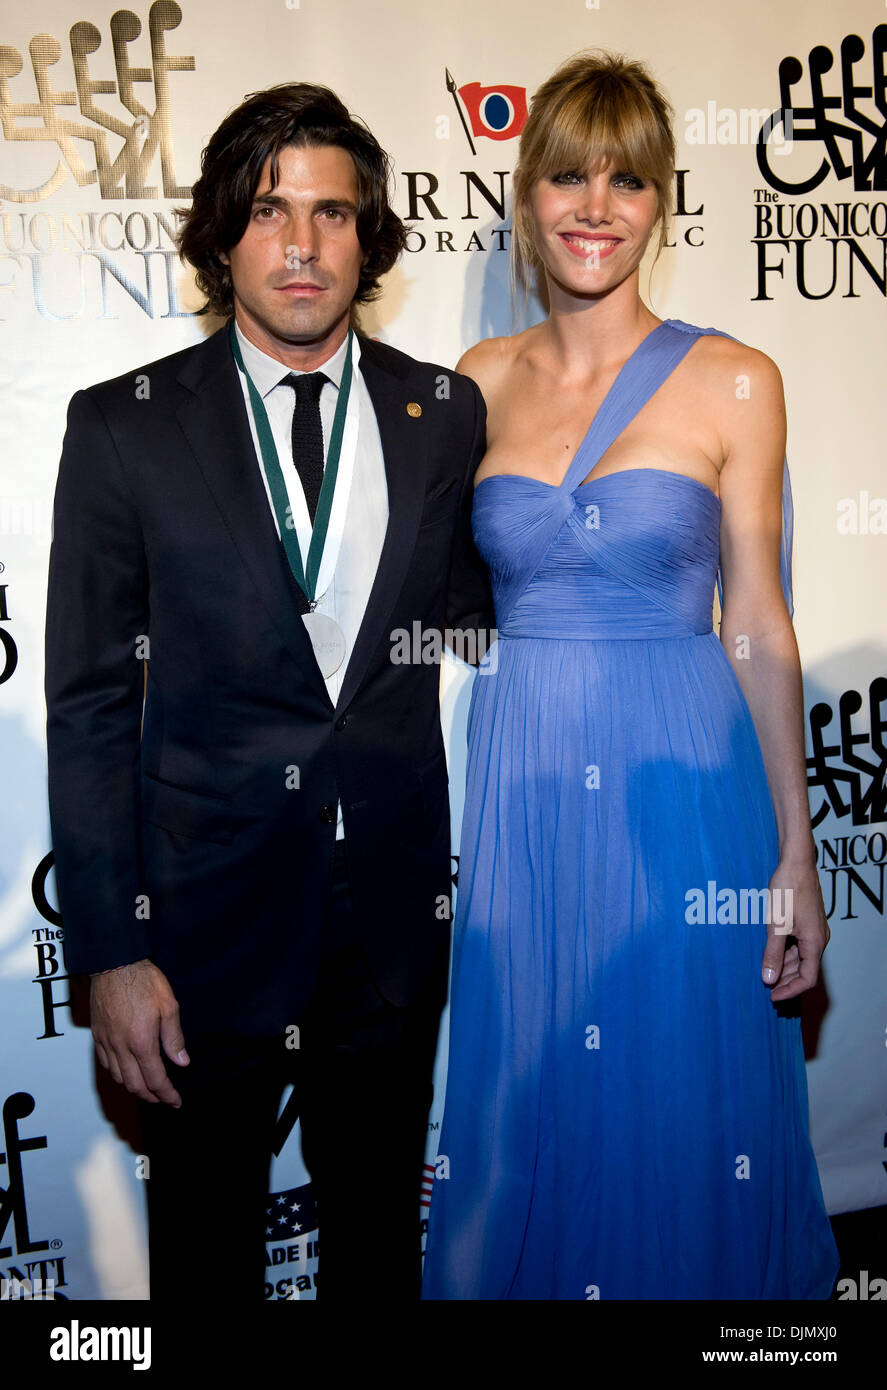 Sept. 27, 2010 - New York, NY, USA - IGNACIO ''NACHO'' FIGUERAS and DELPHINE FIGUERAS at the 25th Annual Great Sports Lends Dinner, which benefits the Buoniconti Fund to Cure Paralysis, at the Waldorf Astoria Hotel.  This year's honorees are Willie Mays, Bill Russell, Michael Irvin, Dan Marino, Annika Sorenstam, Brian Leetch, Ignacio ''Nacho'' Figueras, Laird Hamilton and Calvin Bo Stock Photo